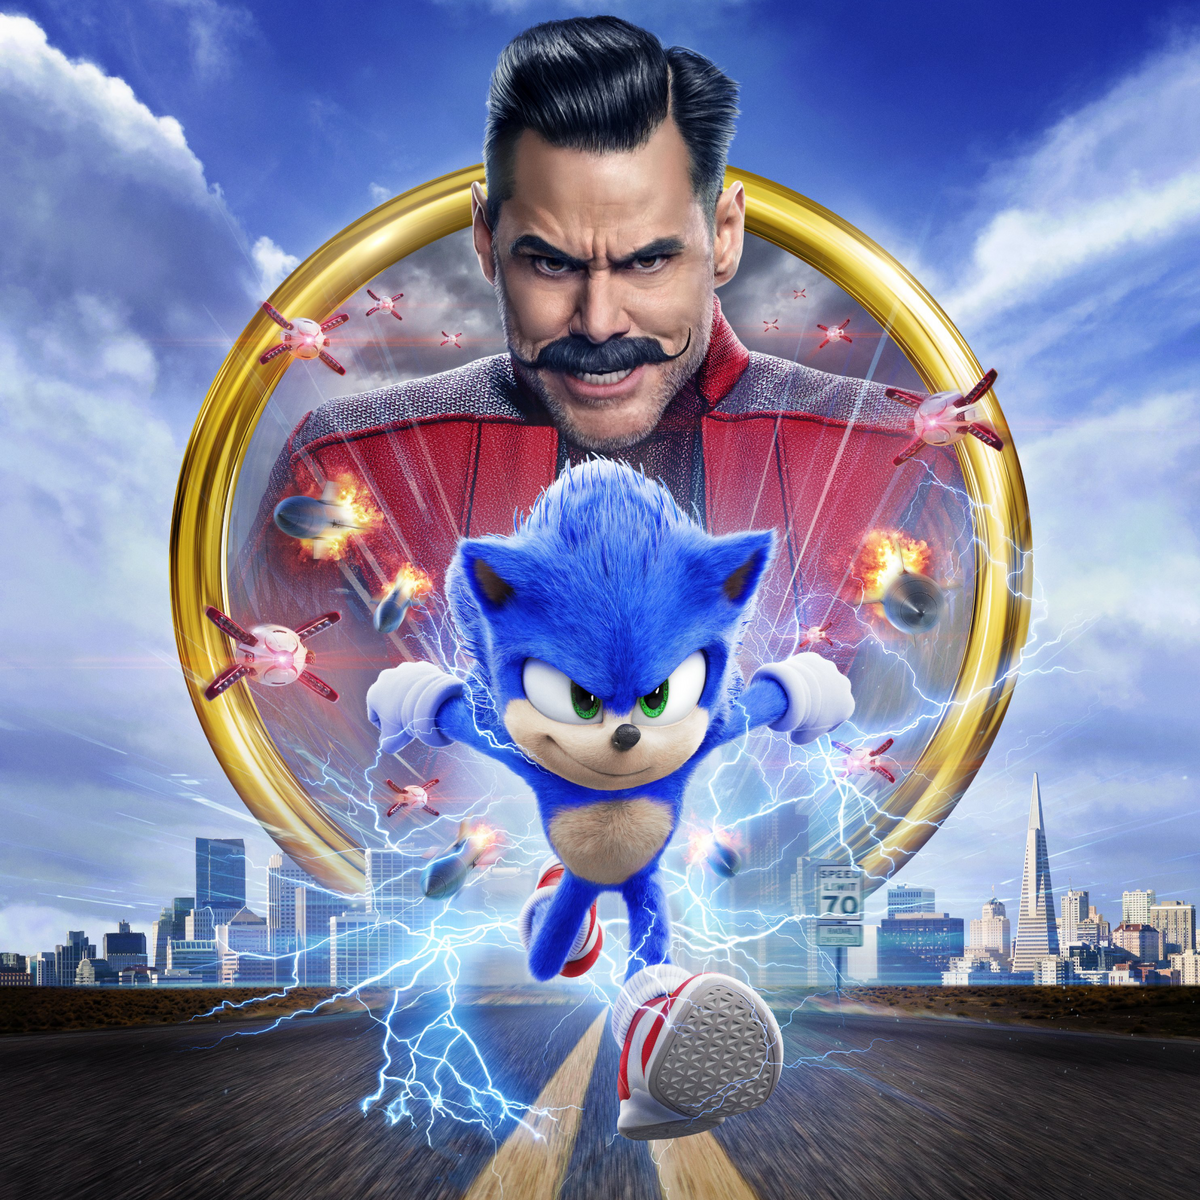 SONIC THE HEDGEHOG (2020): New Official Trailer Starring James